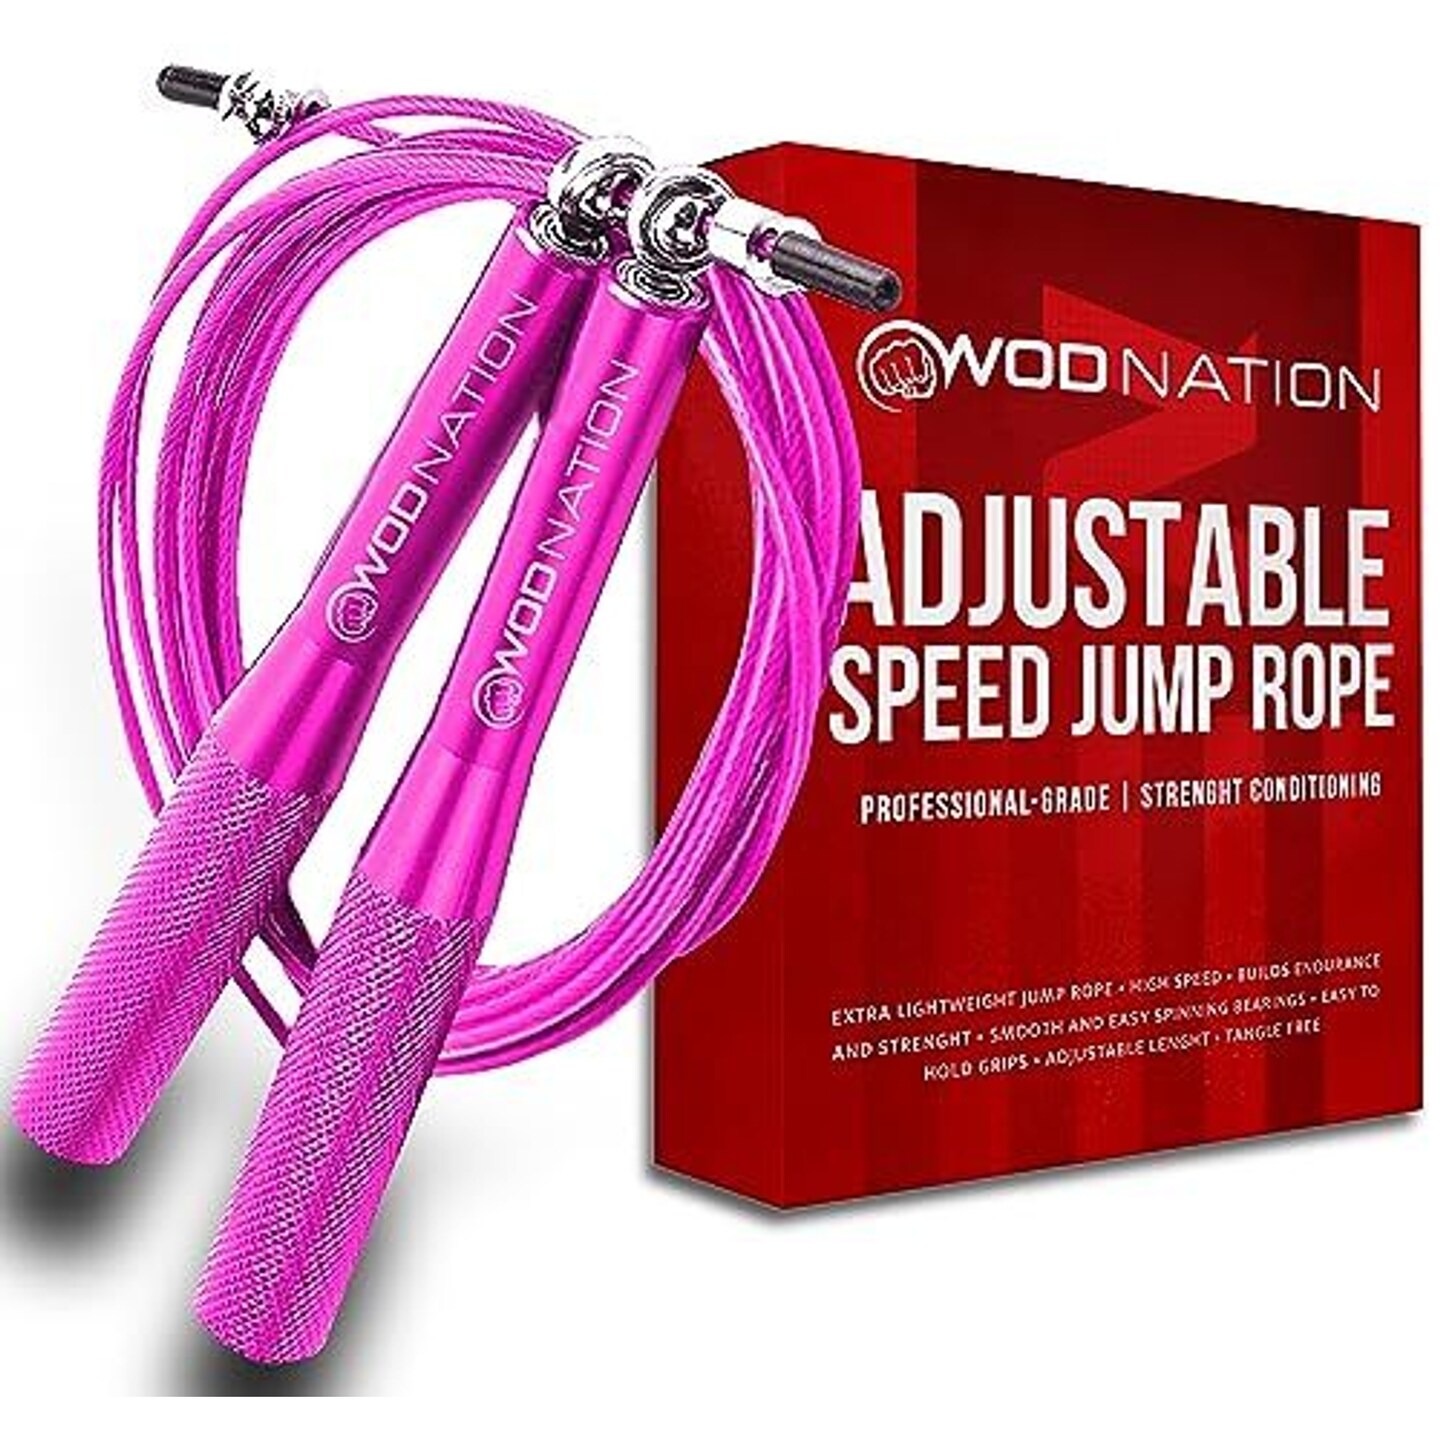 WOD Nation Aluminum Handle High Speed Adjustable Jump Rope for Women and Men - Perfect Skipping Rope for Boxing, Fitness, Workout - Pink